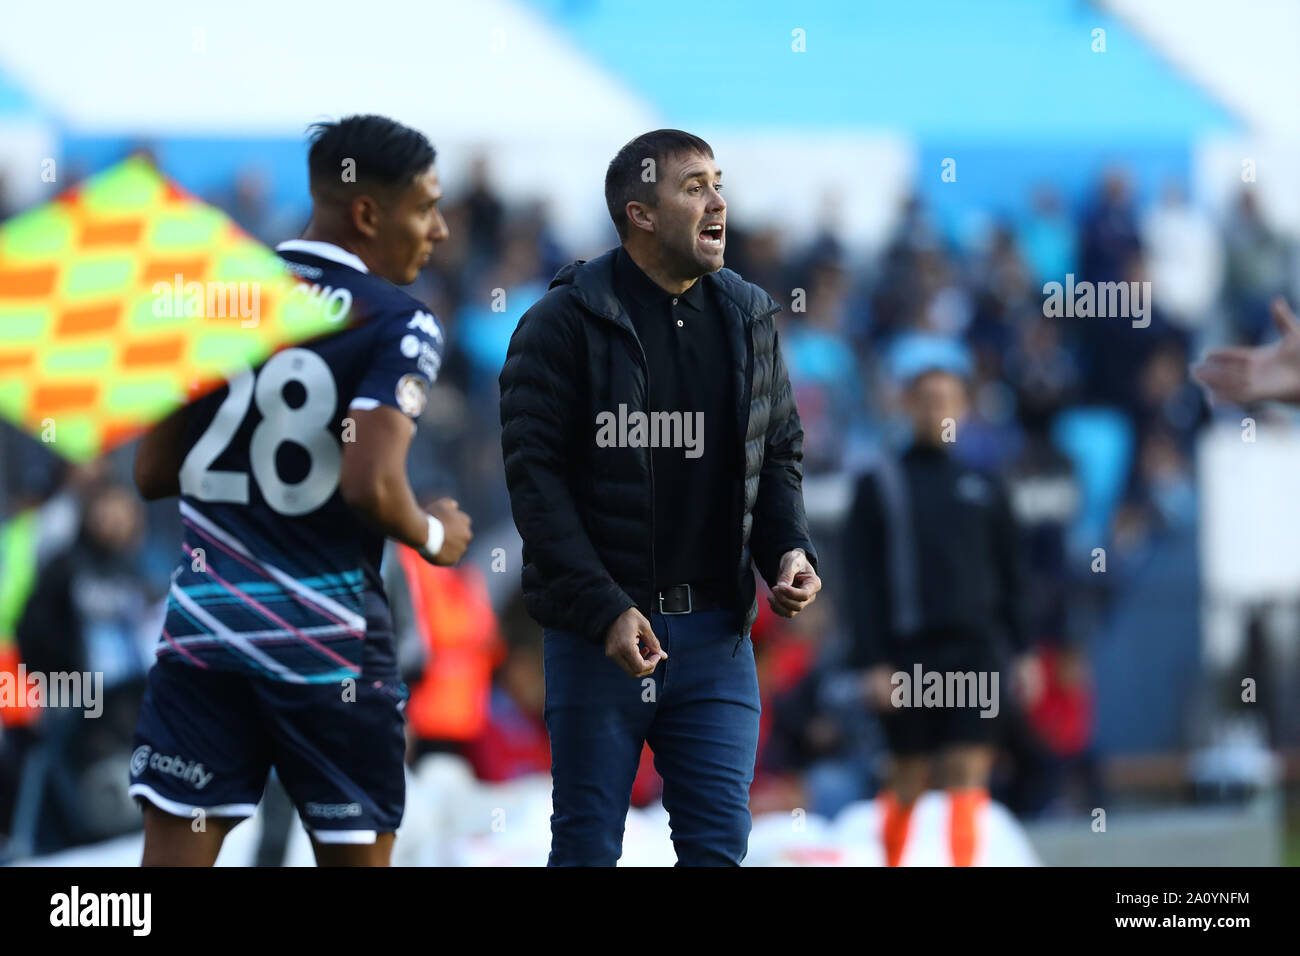 Buenos Aires, Argentina - September 22, 2019: Eduardo Coudet (Racing Club) doing gestures in a match in Buenos Aires, Argentina Stock Photo